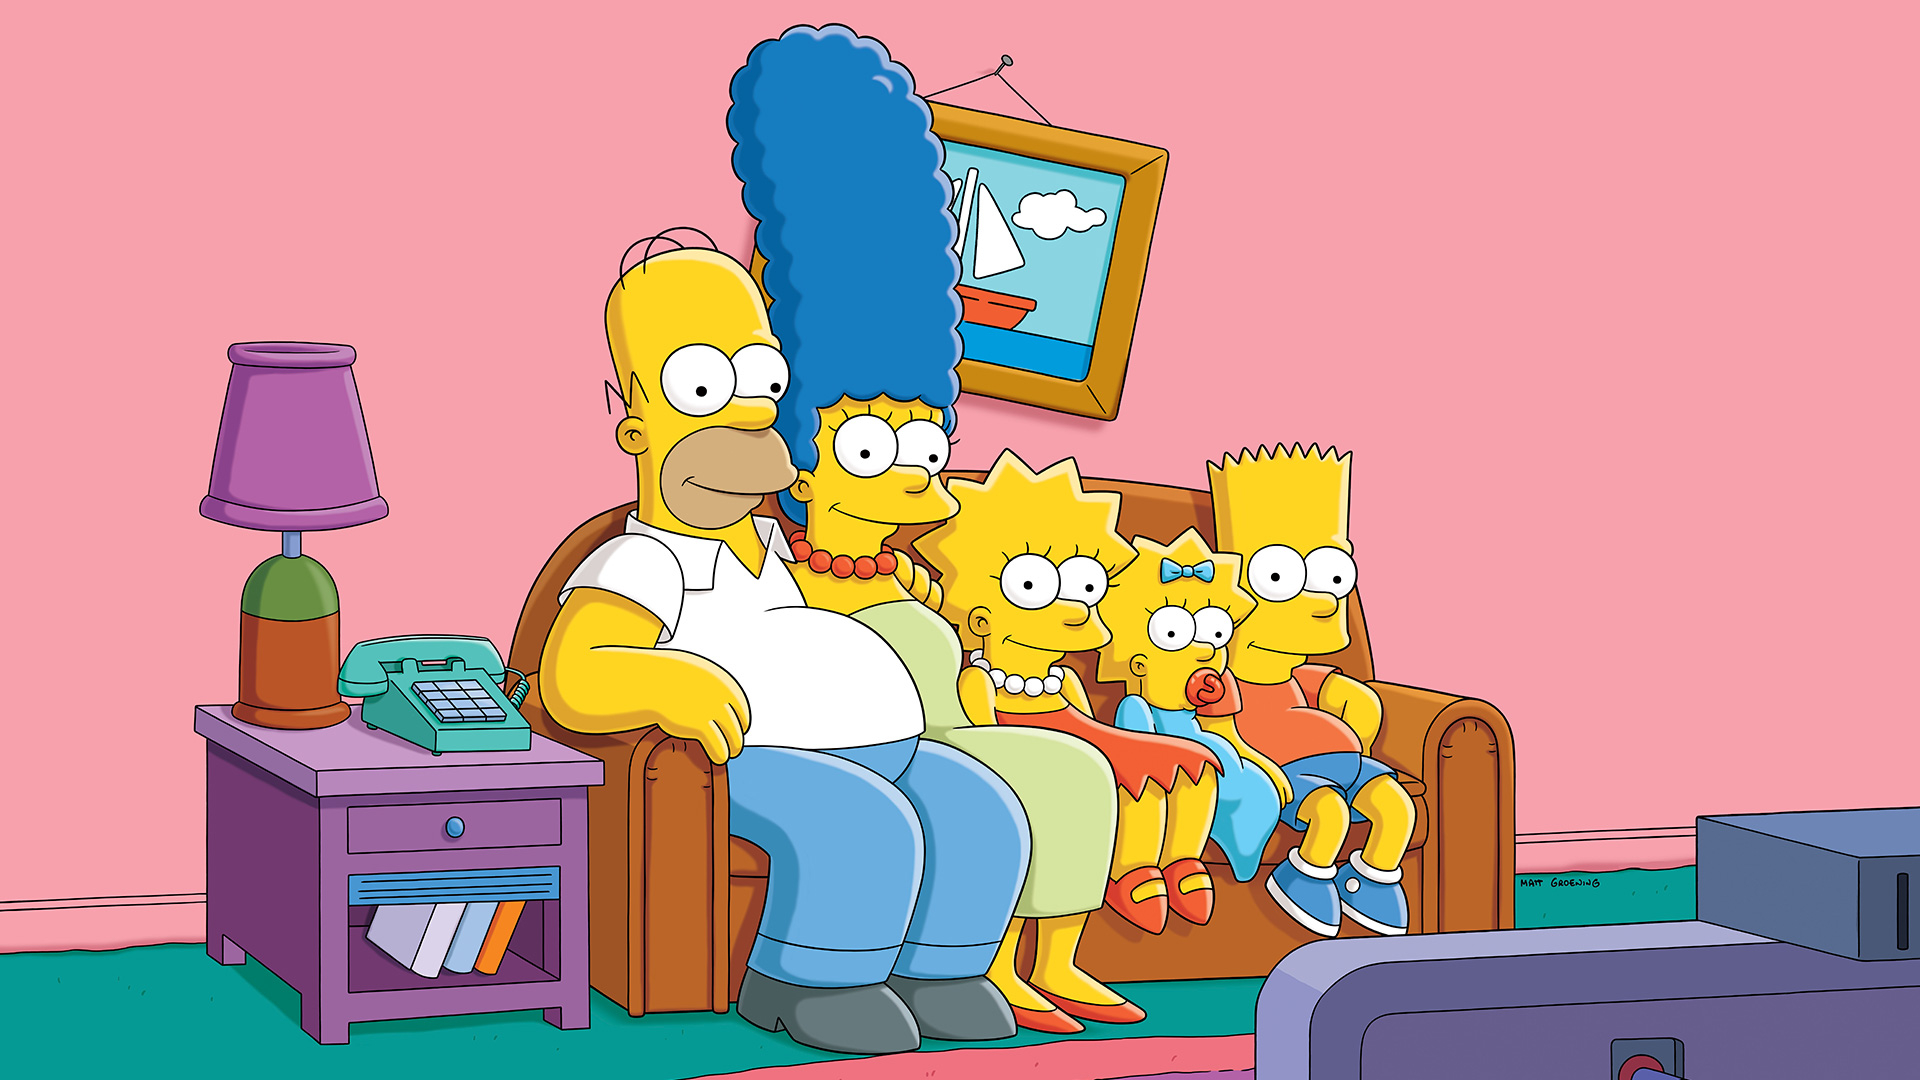 1920x1080 2560x1600 The Simpsons Original 2560x1600 Resolution HD 4k Wallpapers, Images, Backgrounds, Photos and Pictures